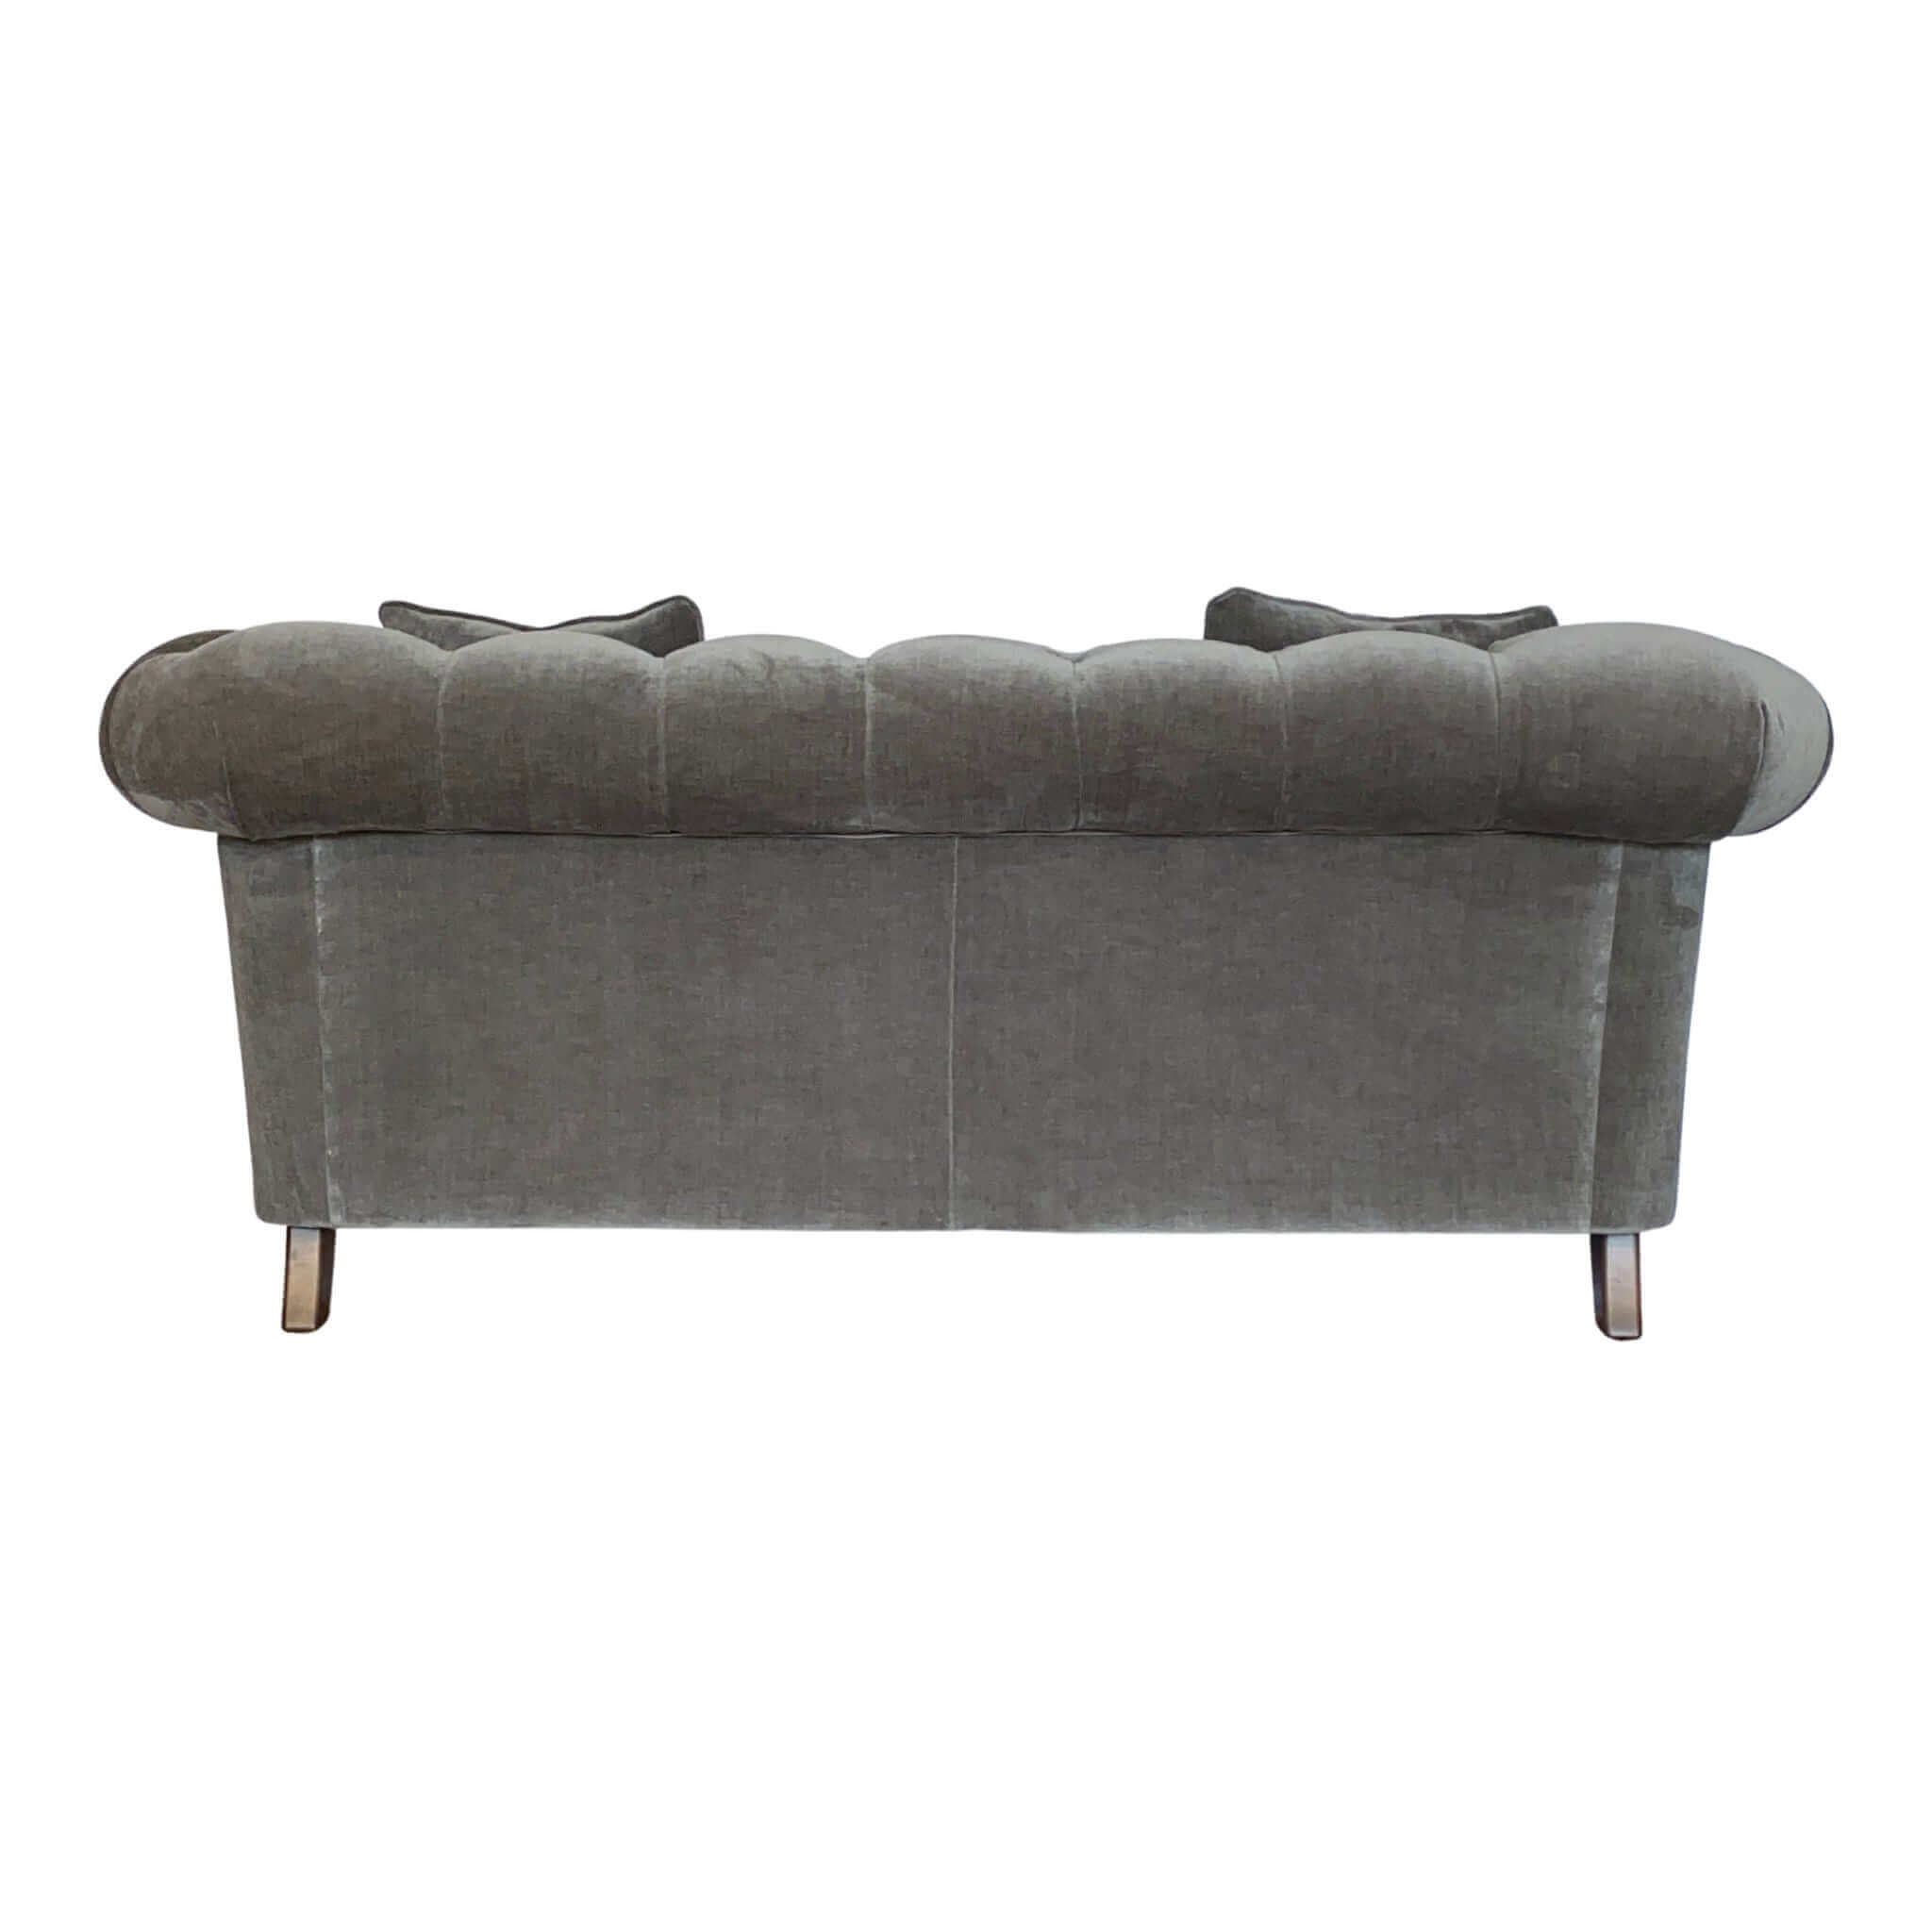 Edgecombe 3-Seat Chesterfield Sofa - escapologyhome.co.uk